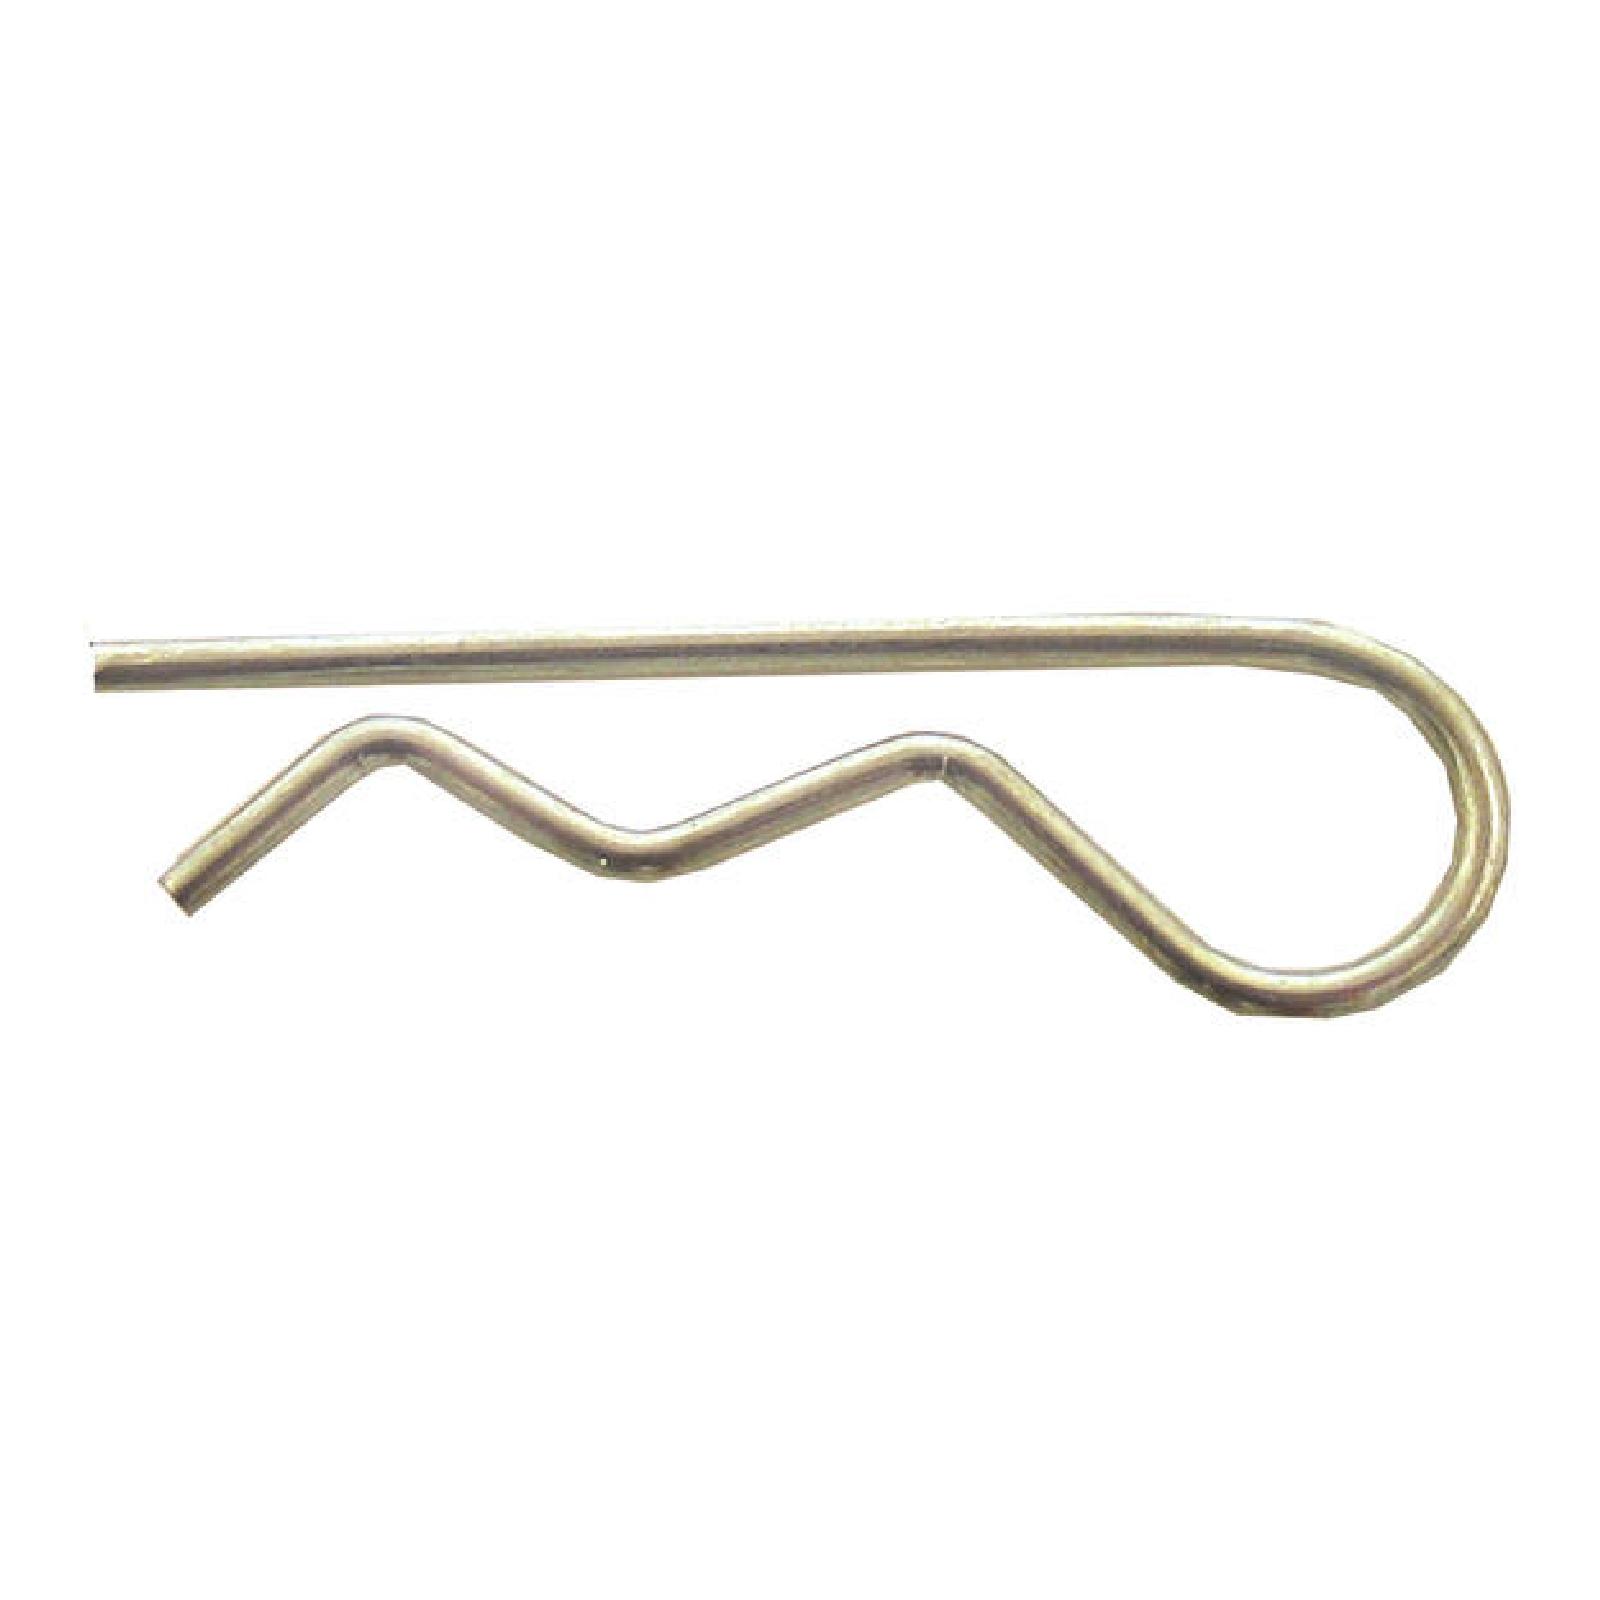 HAIR PIN CLIP .062 X 1 5/ part# 02-424 by Oregon - Click Image to Close